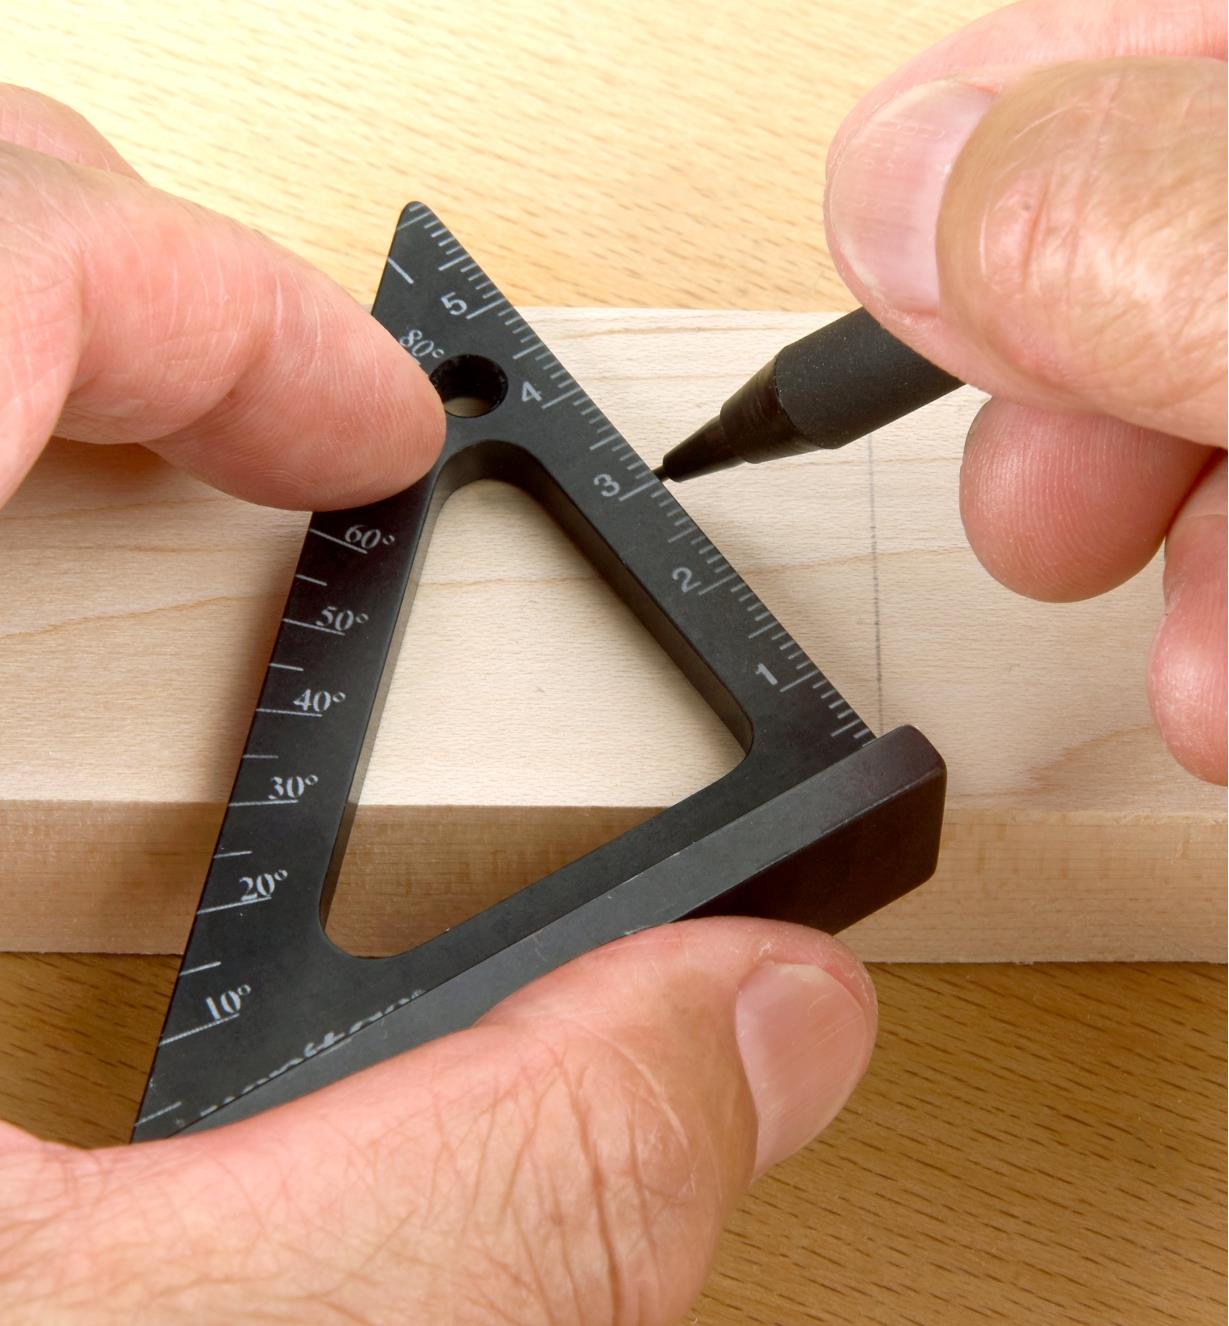 Using the protractor scale marked on a Veritas 60mm Pocket Layout Square to lay out a 30° cut line